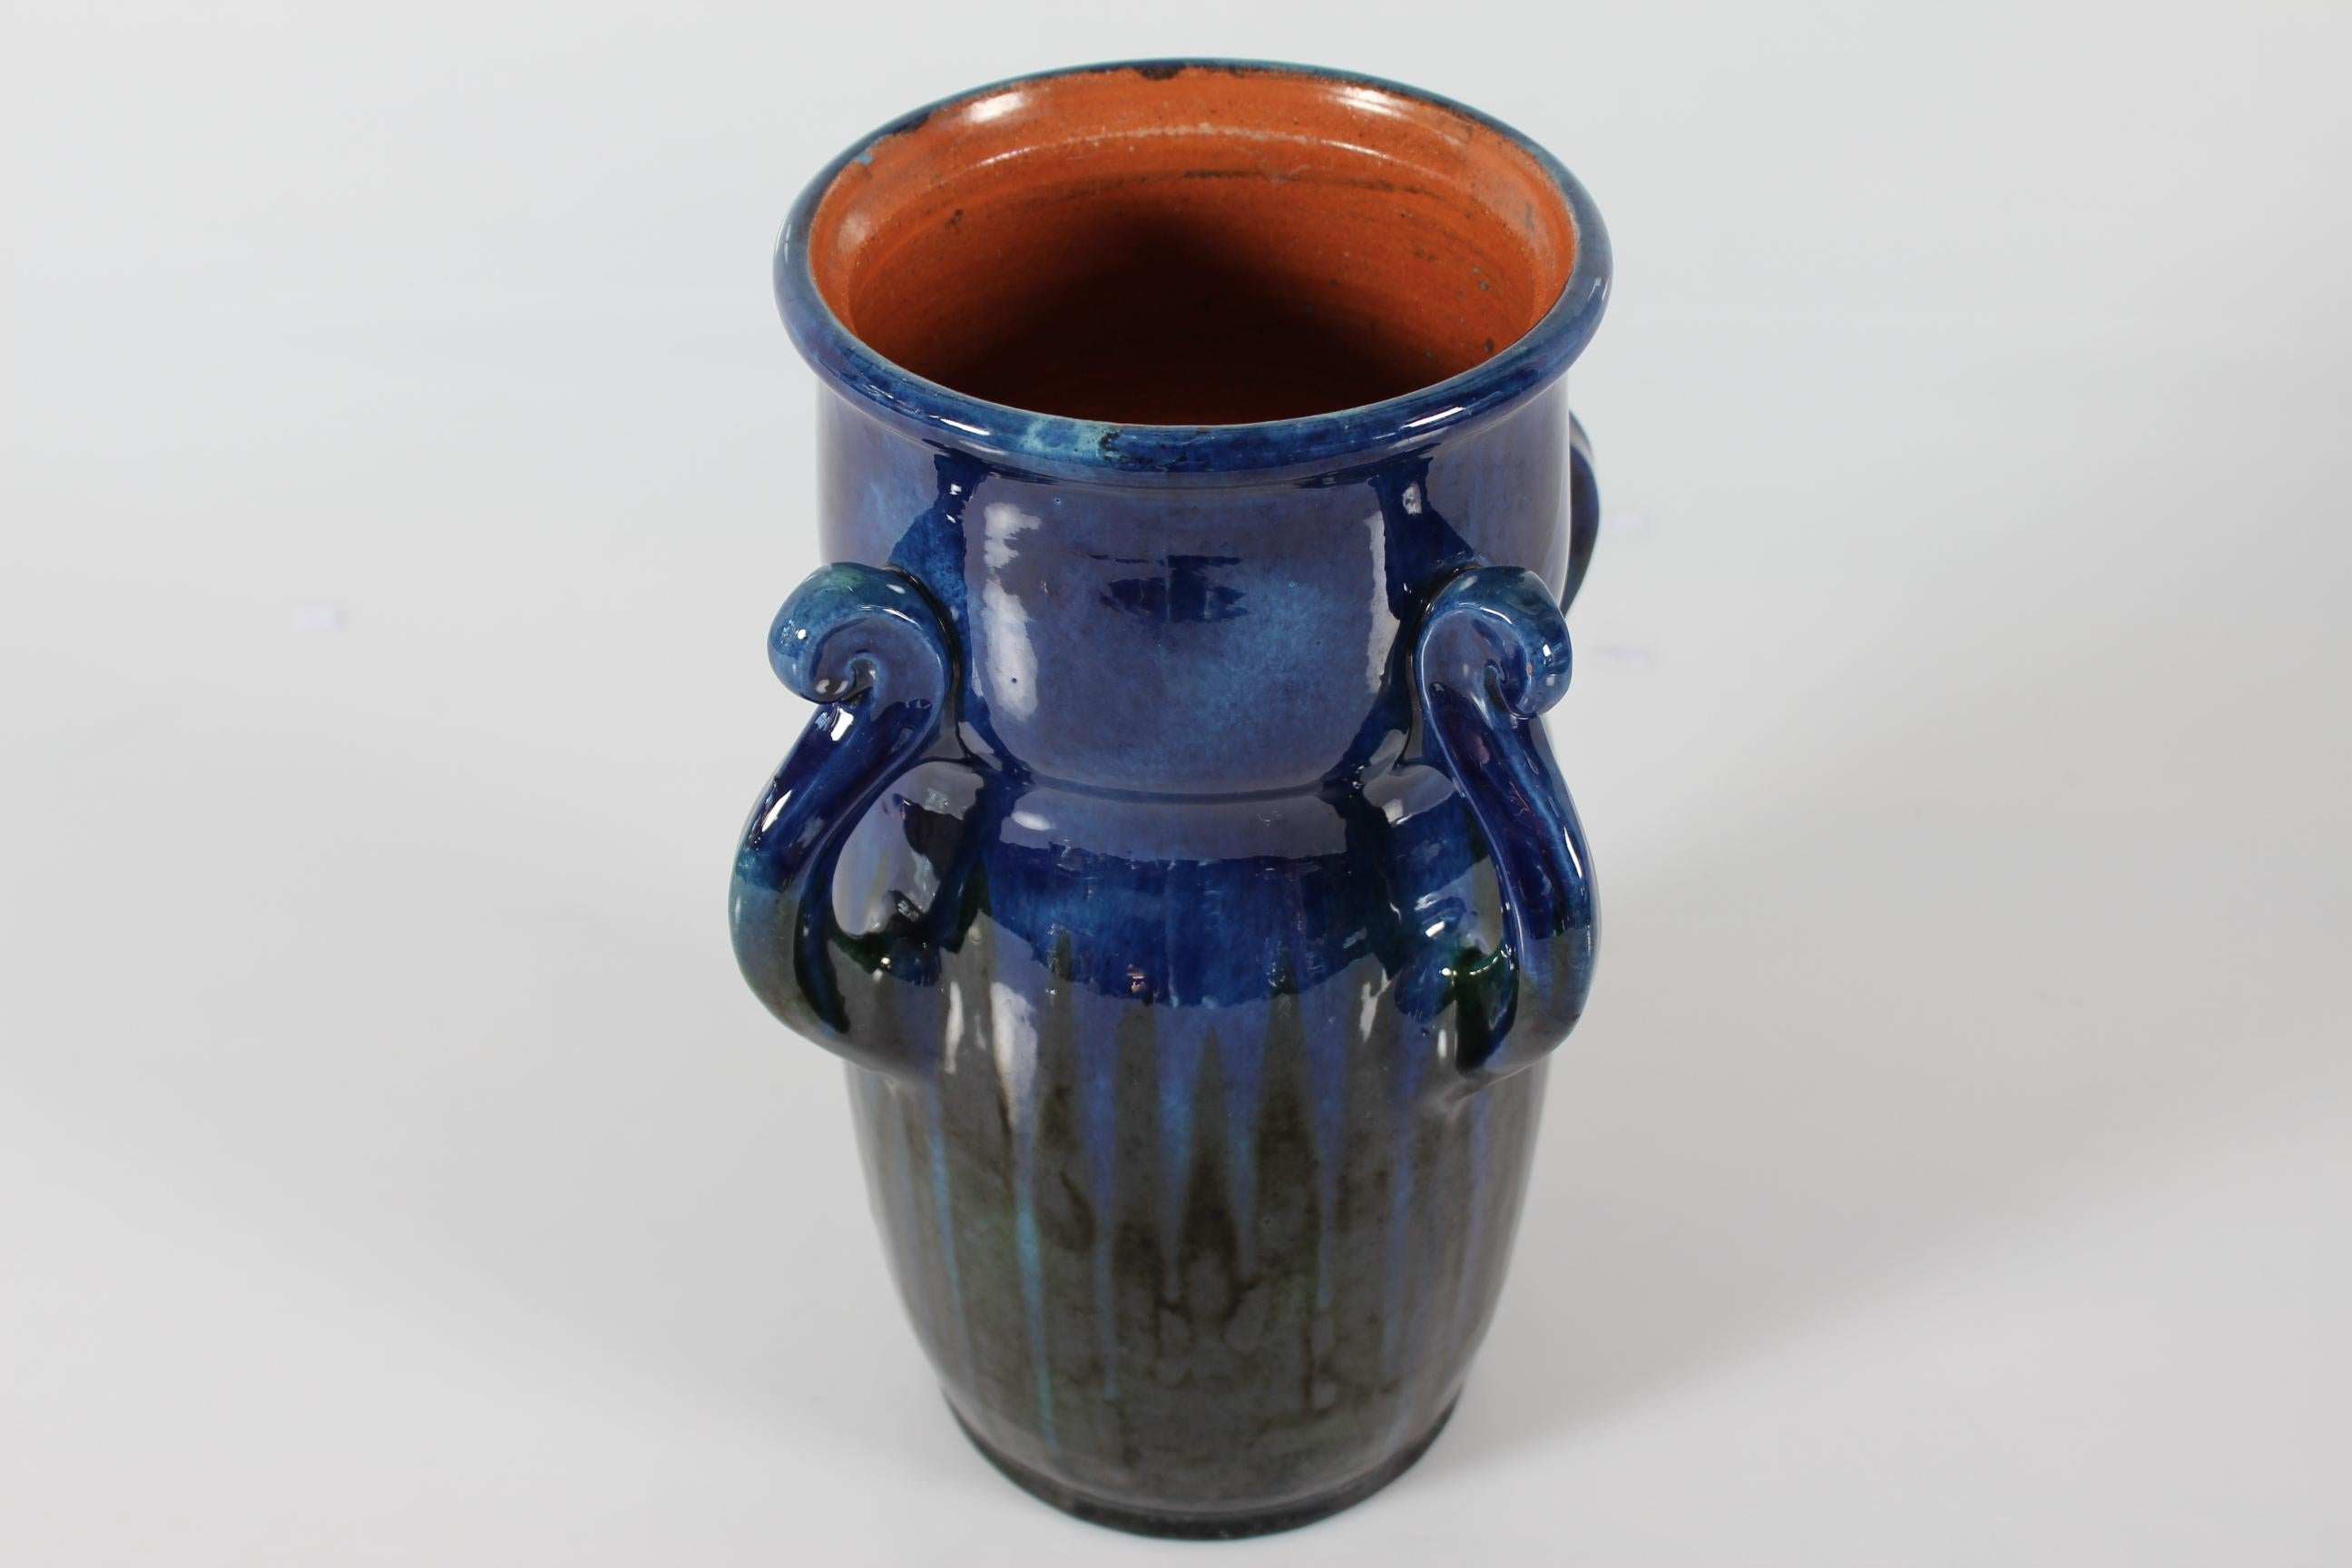 Sculptural ceramic vase made by Herman A. Kähler ceramic works circa 1910
The vase has modeled starfish-arm shaped handles glazed with glossy deep blue luster glaze turning into green in stripes towards the bottom.

Height 30 cm
Diameter corpus